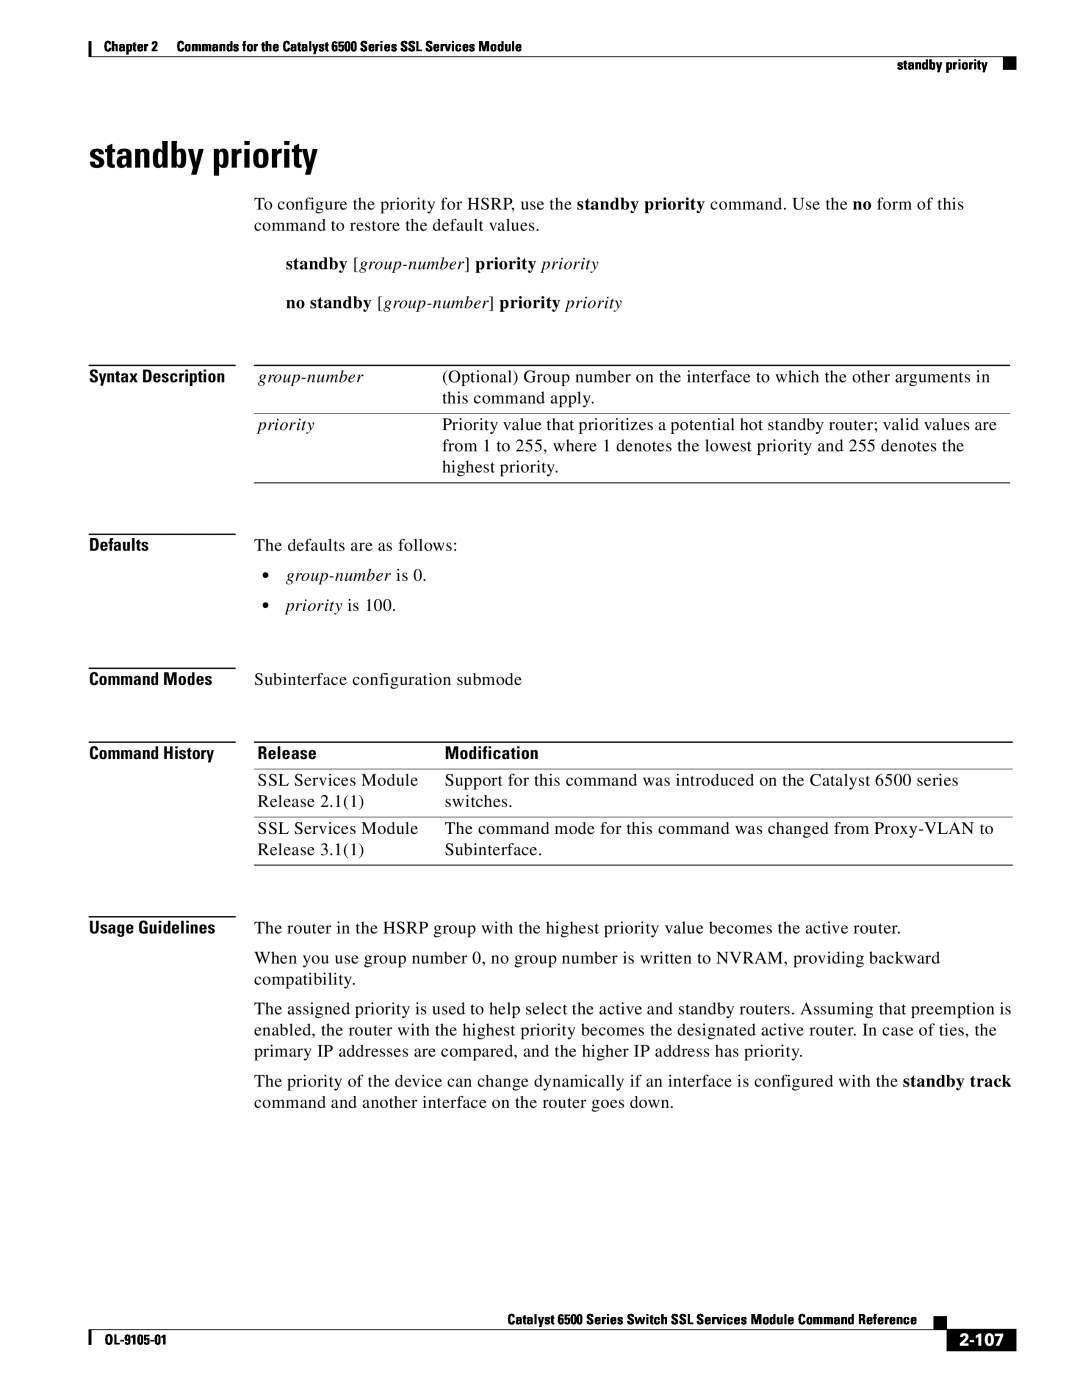 Cisco Systems 6500 manual standby priority, no standby group-number priority priority, 2-107, Syntax Description, Release 